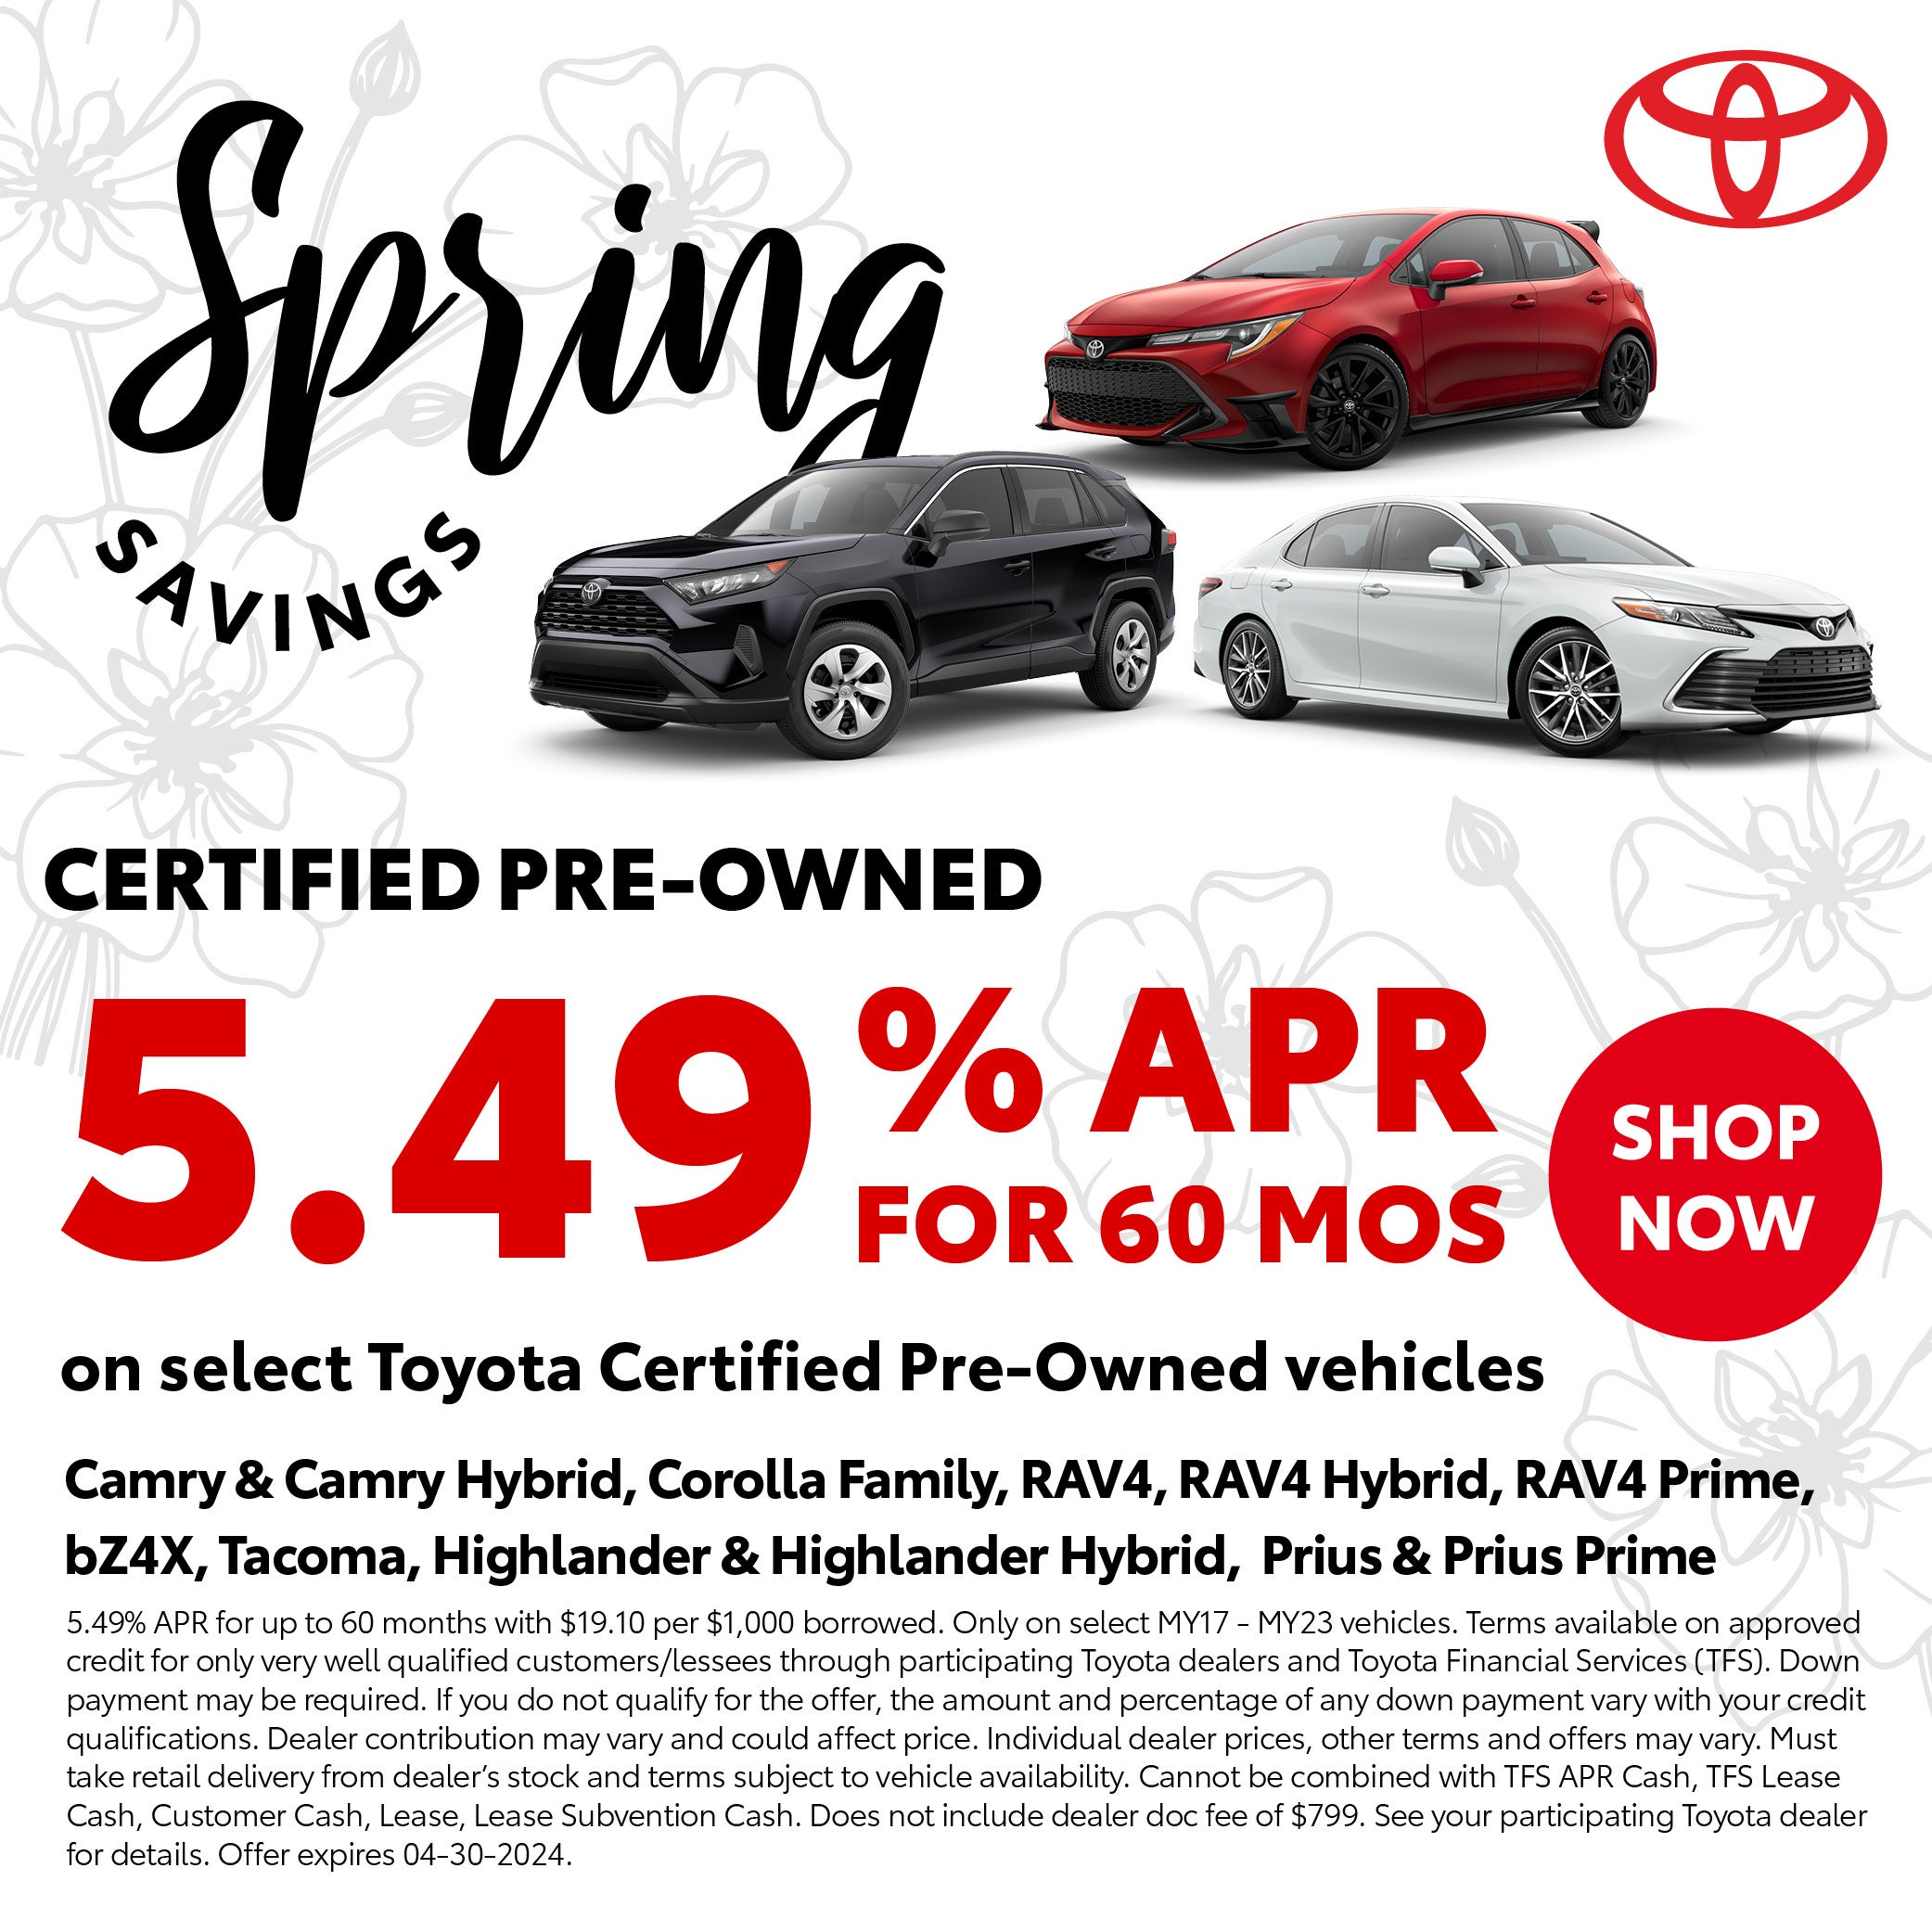 Toyota Certified Pre-Owned